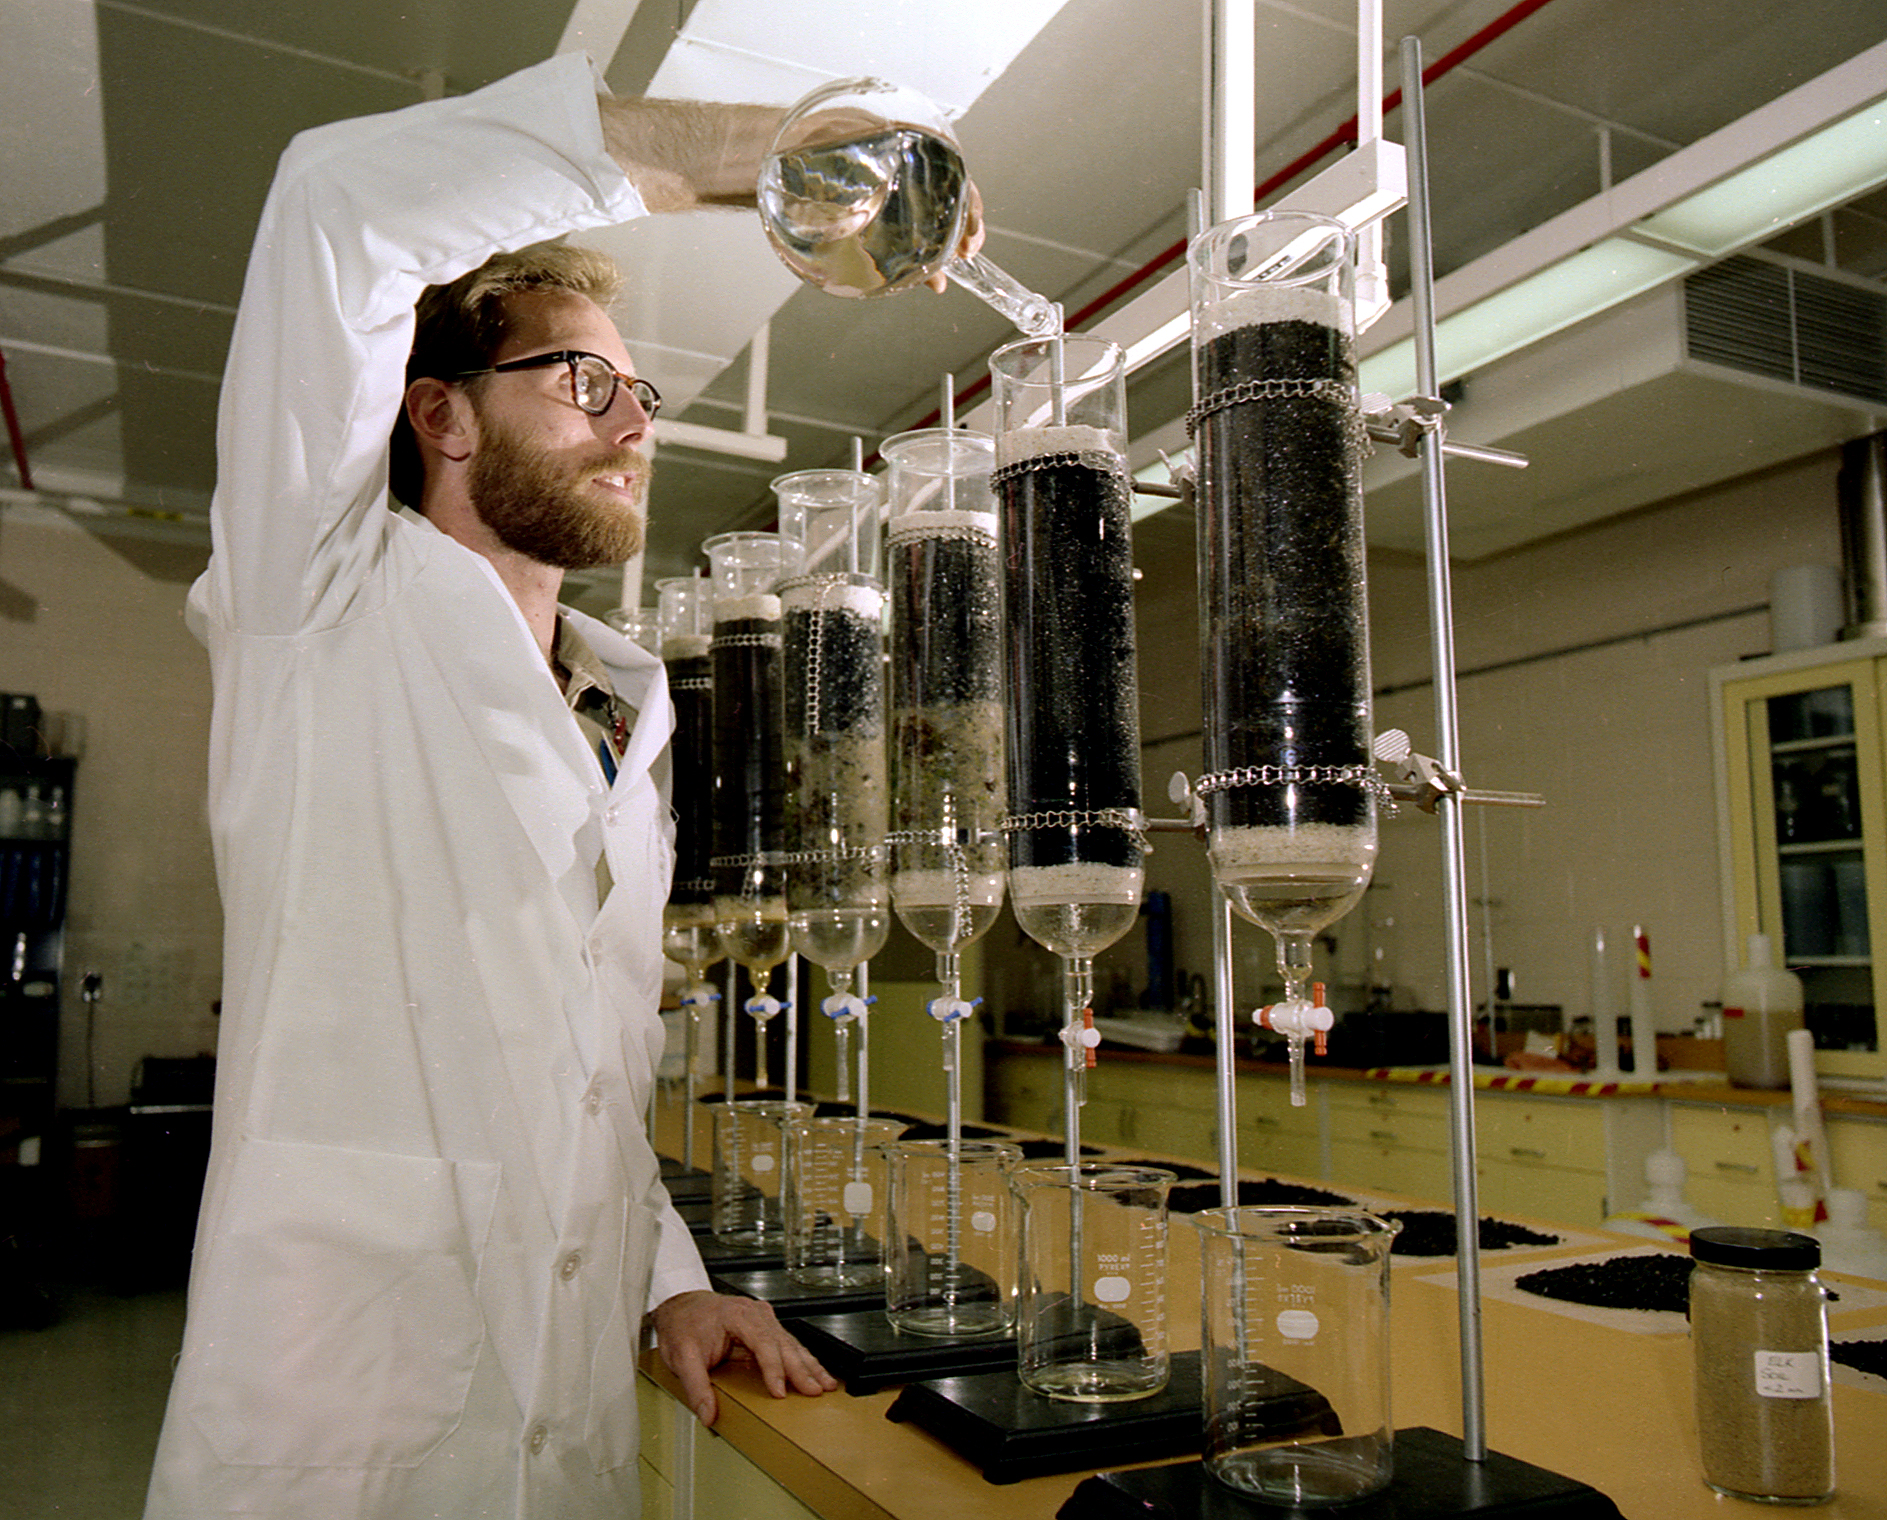 Scientist pouring liquid from a beaker into a titration system.